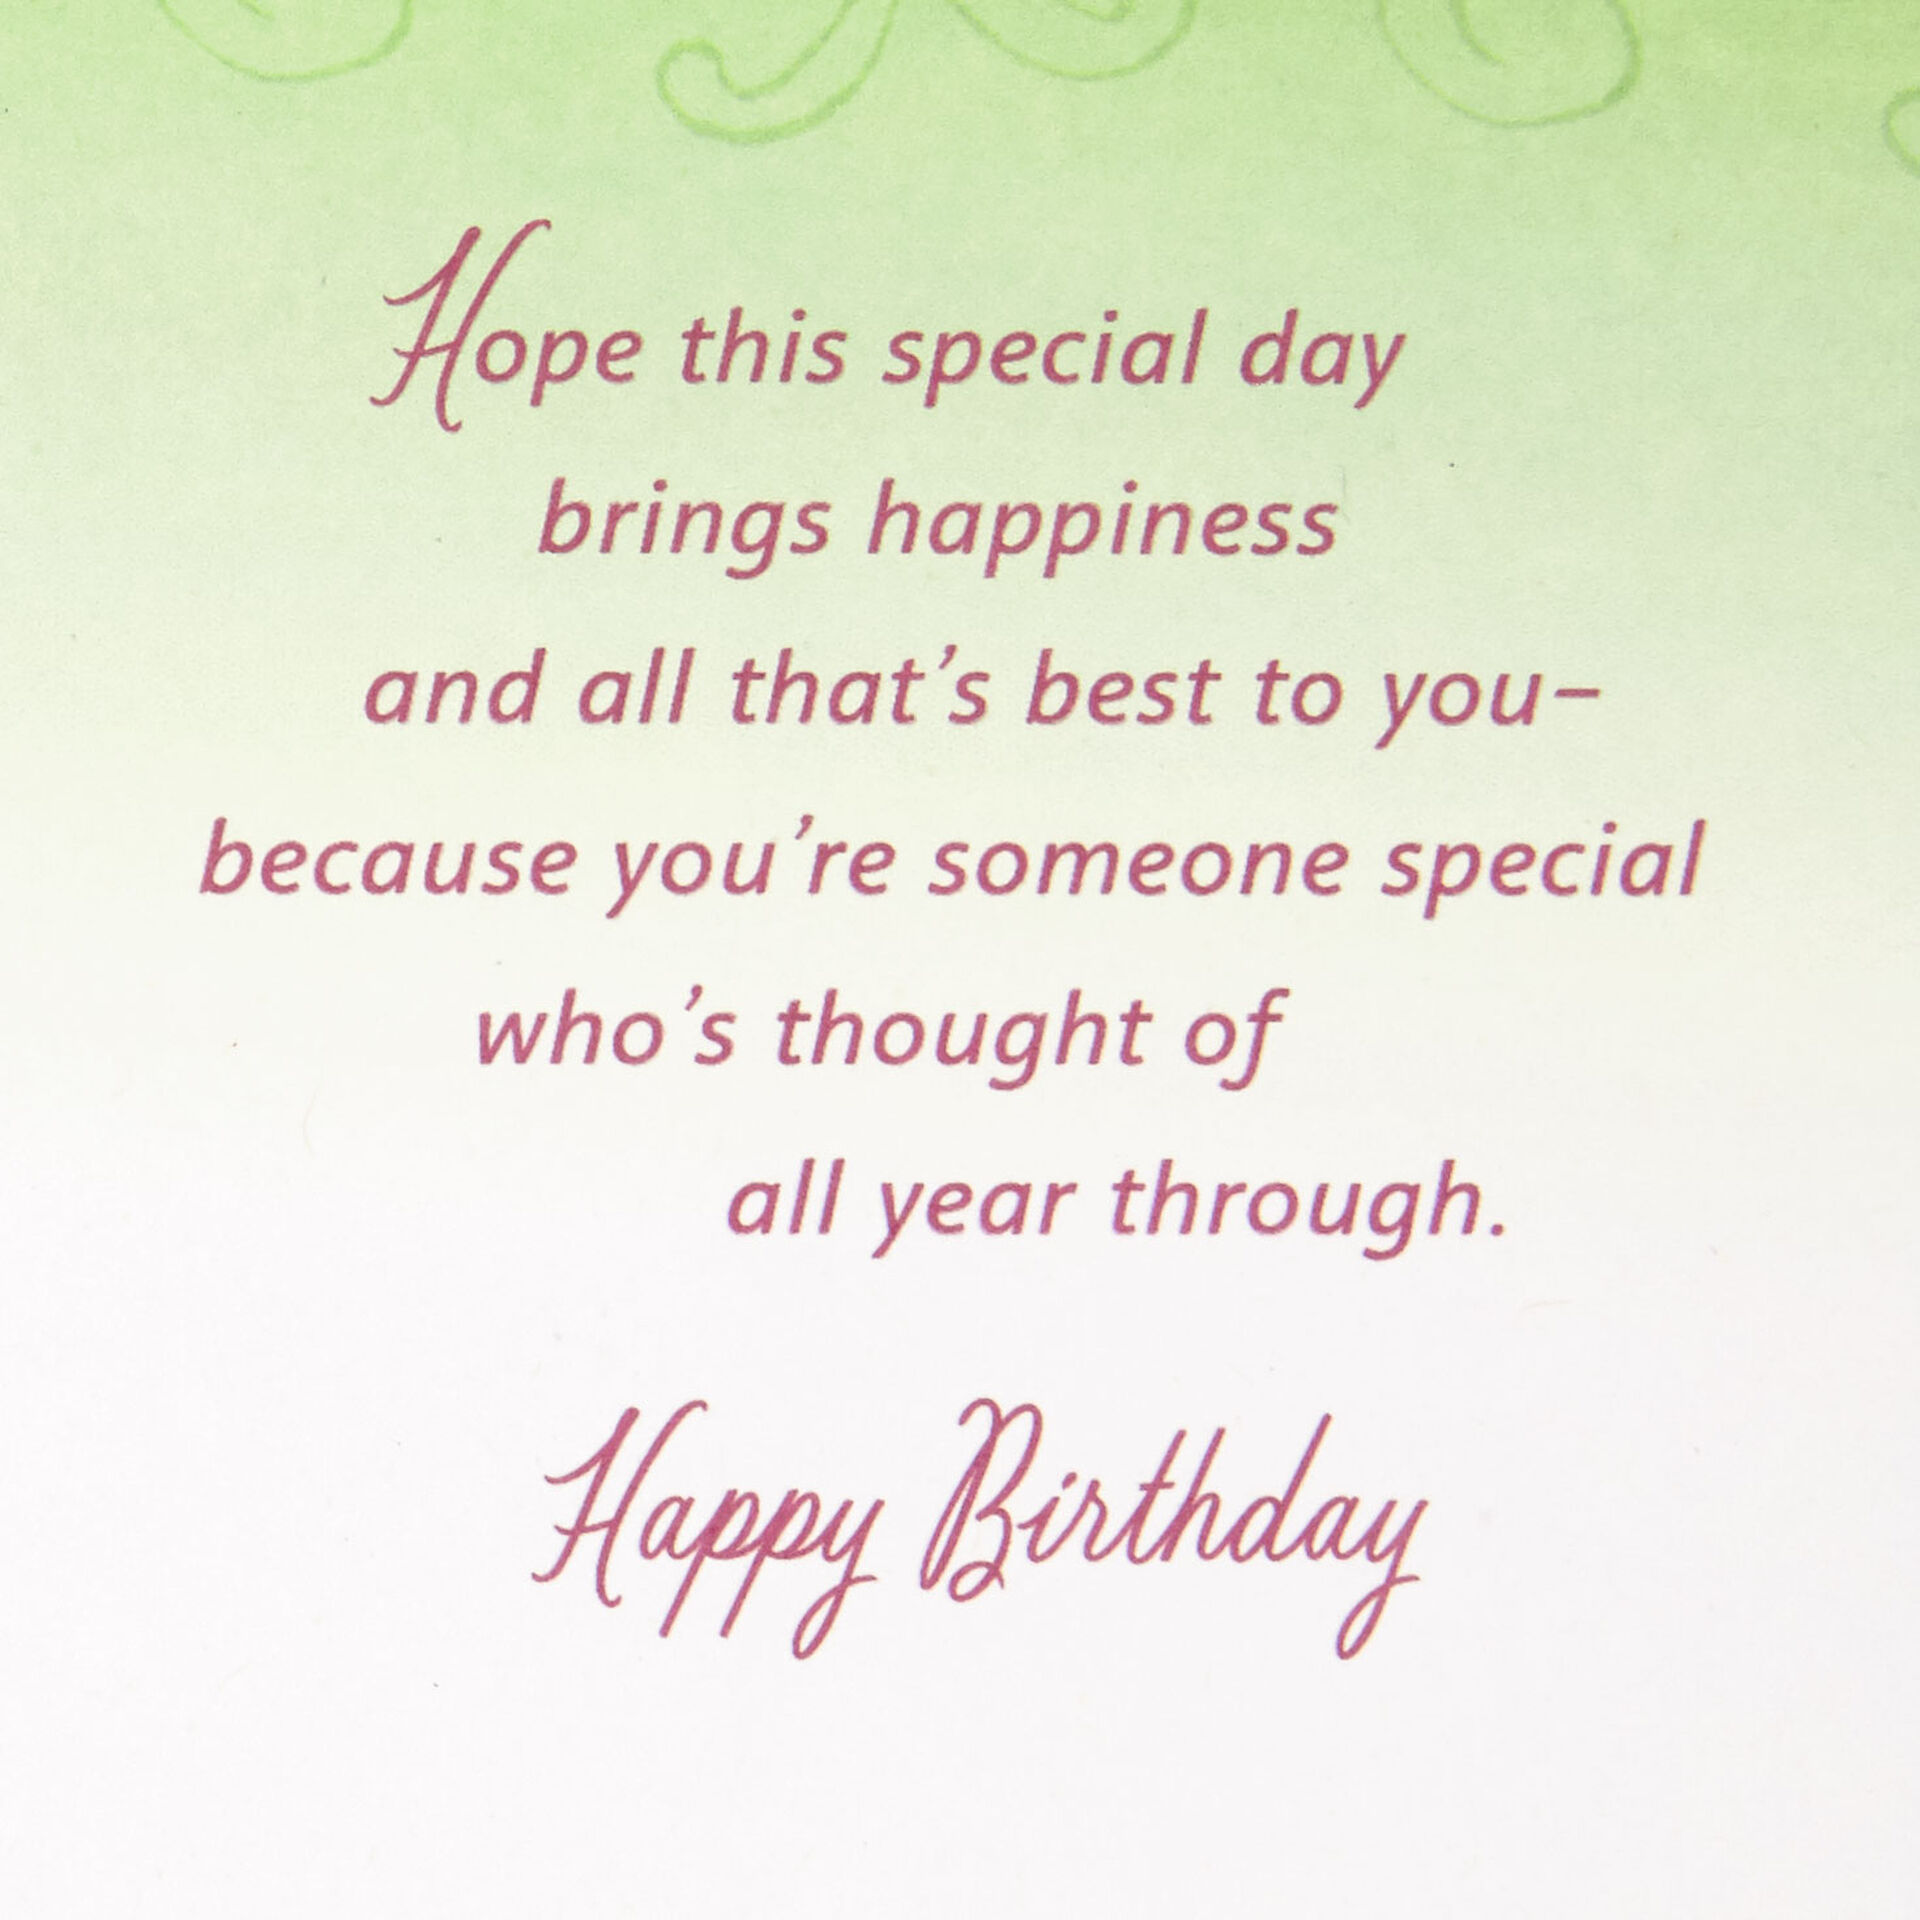 Flowers-in-Vase-with-Scrolls-Birthday-Card-for-Her_200SUV1304_02